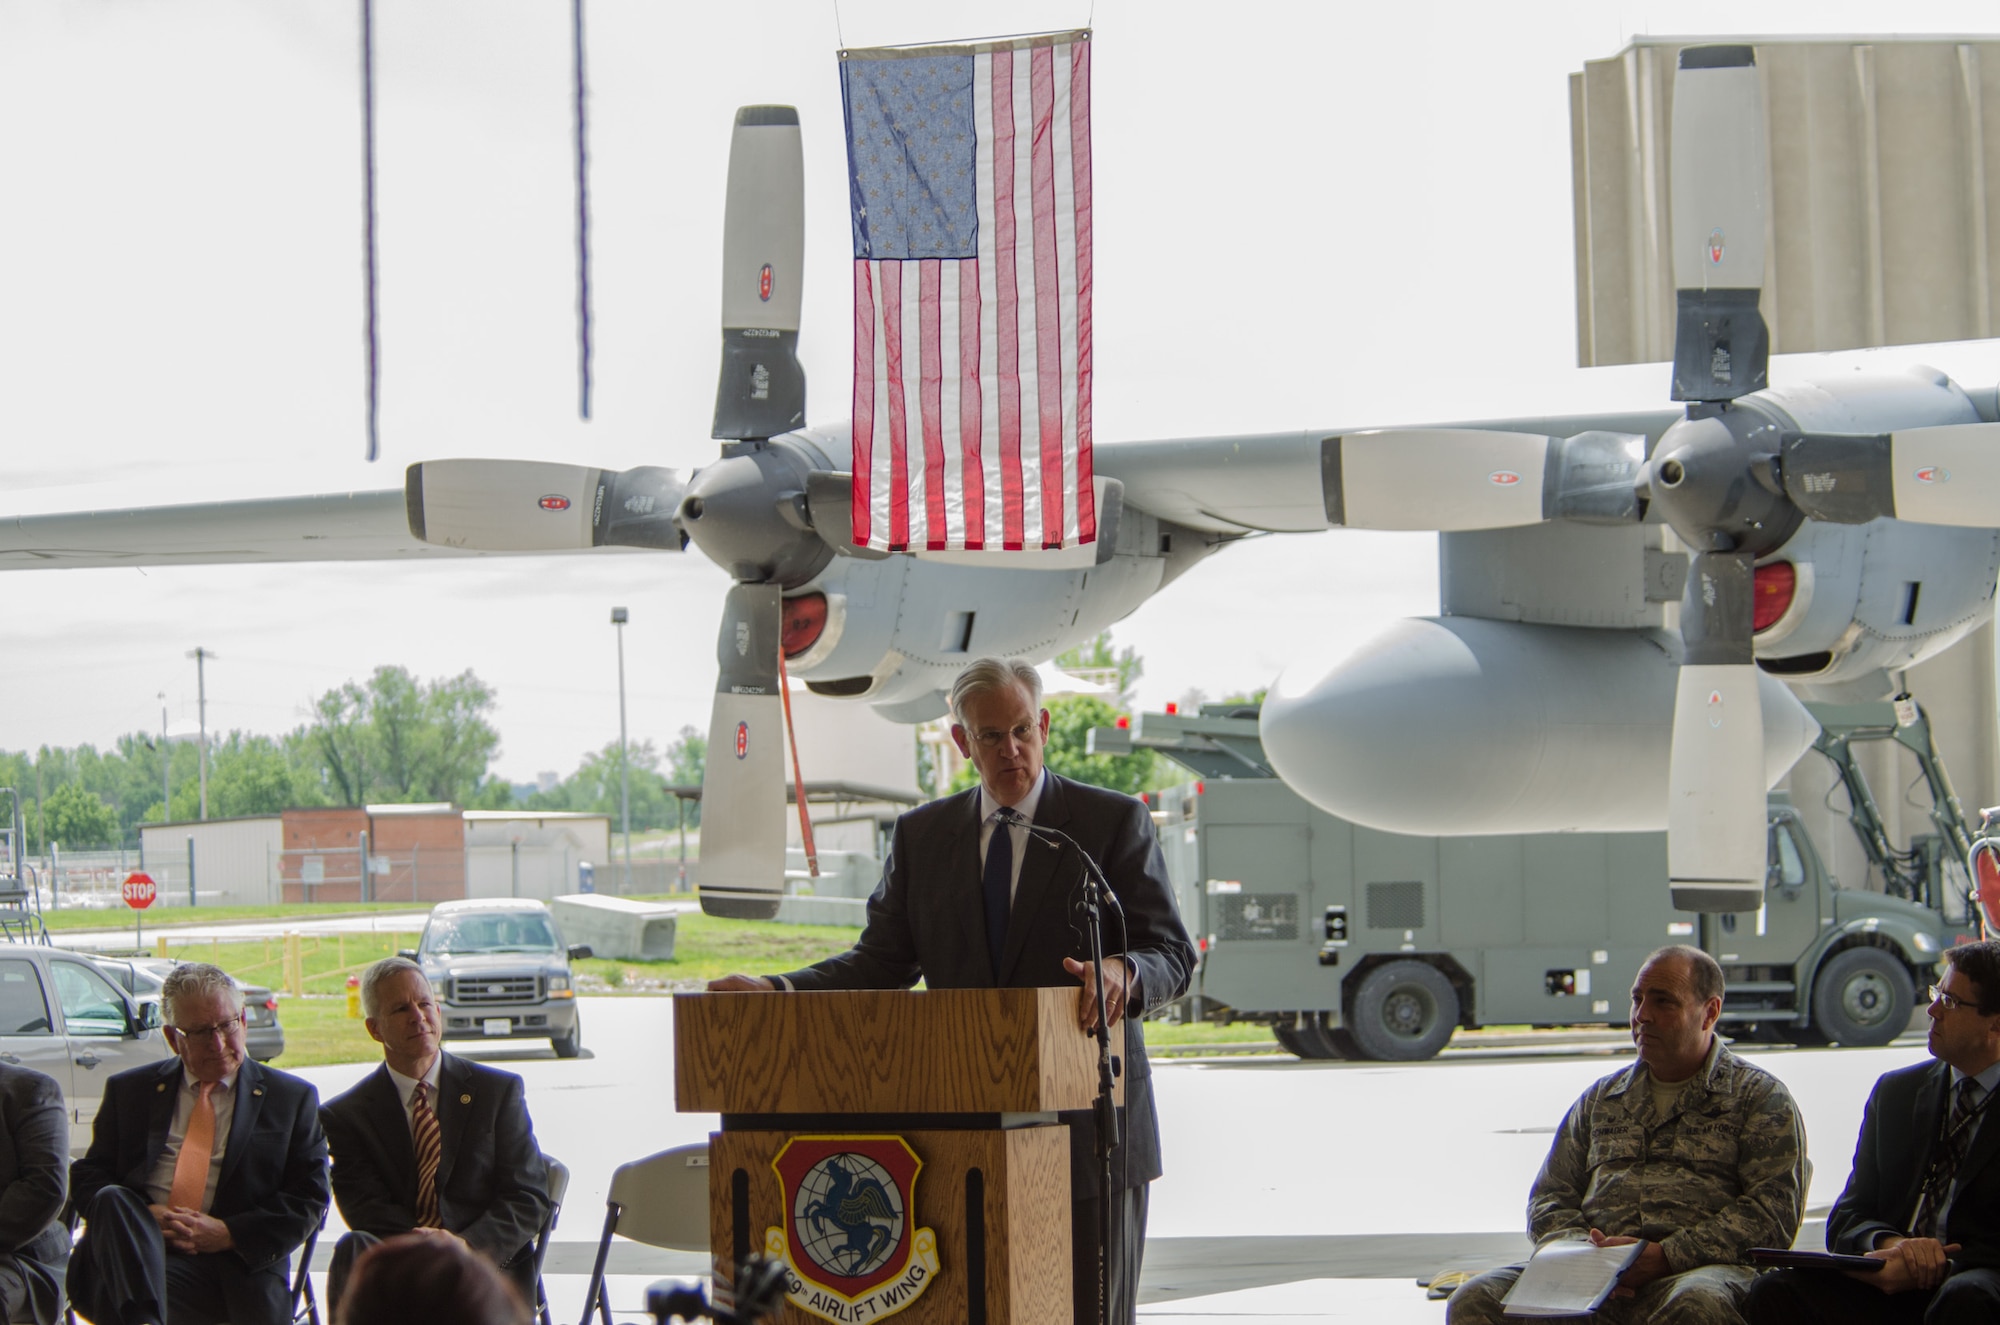 Missouri Gov. Jay Nixon speaks at a press conferences at Rosecrans Air National Guard Base, St. Joseph, Mo., on May 25, 2016. The governor announced that $5 million of state funding will be used to reinforce the levees along the Missouri River which protect the 139th Airlift Wing and surrounding communities. (U.S. Air National Guard photo by Tech. Sgt. Erin Hickok/Released)